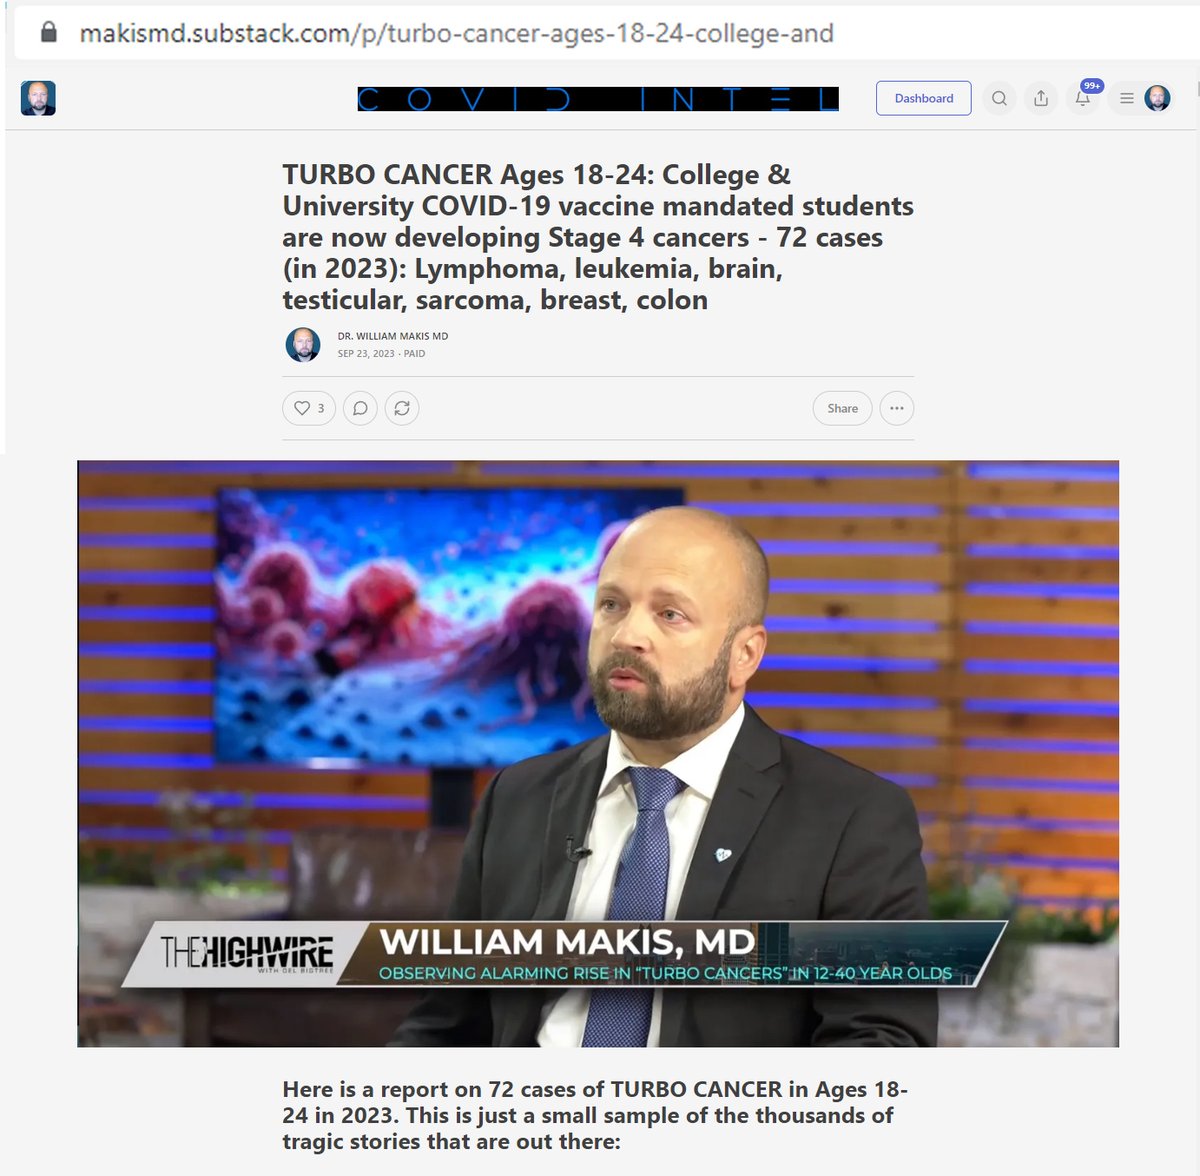 NEW ARTICLE: TURBO CANCER Ages 18-24: College & University COVID-19 vaccine mandated students are now developing Stage 4 cancers

I report 72 cases here (in 2023):

- very large tumors (football size, watermelon)
- very rare tumor subtypes
- urgent bone marrow transplants needed